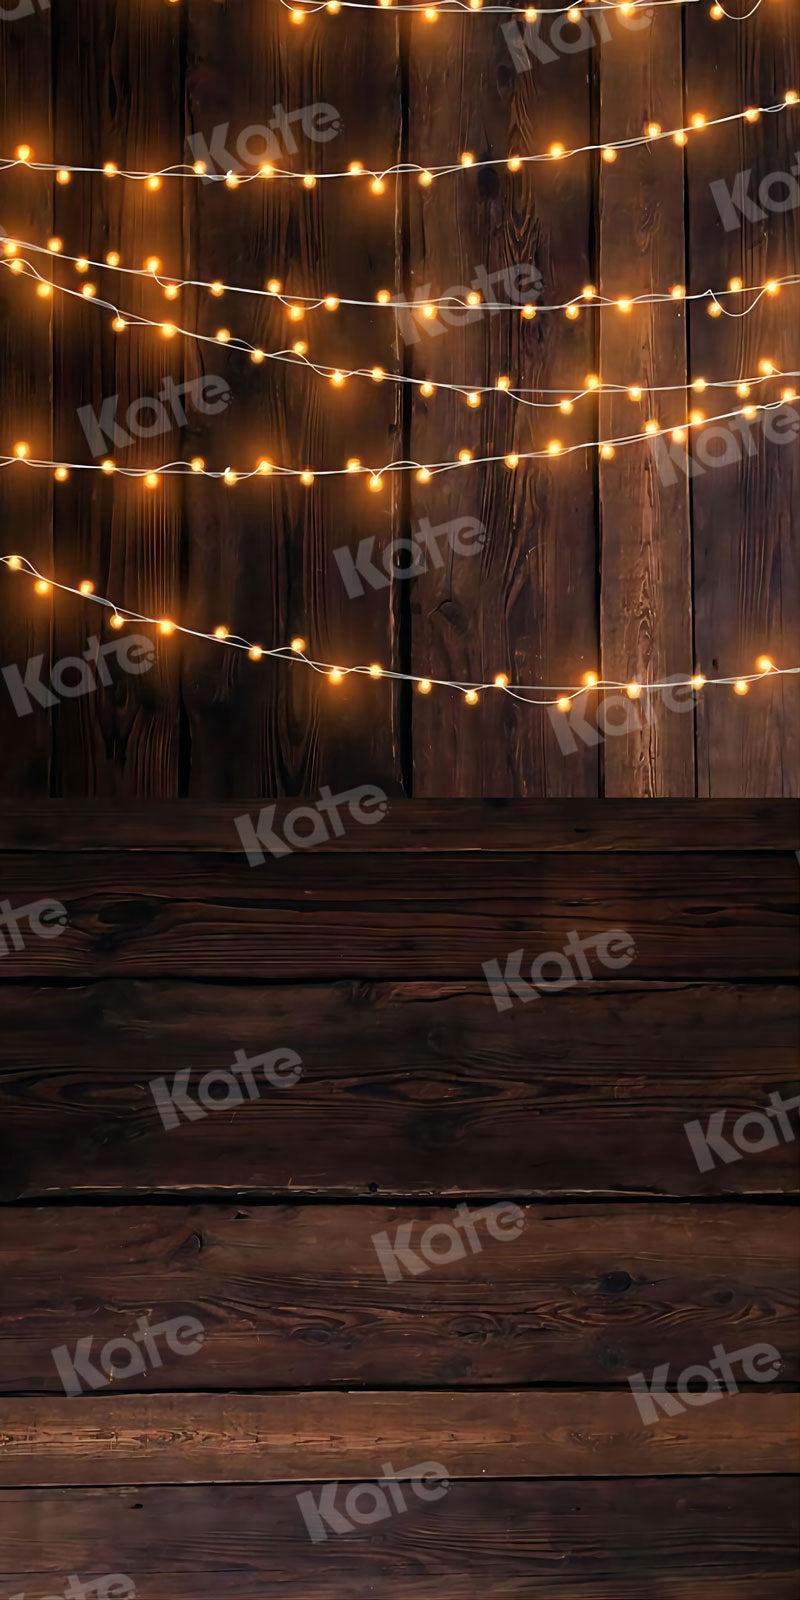 Kate Sweep Backdrop Wood Texture String Lights for Photography